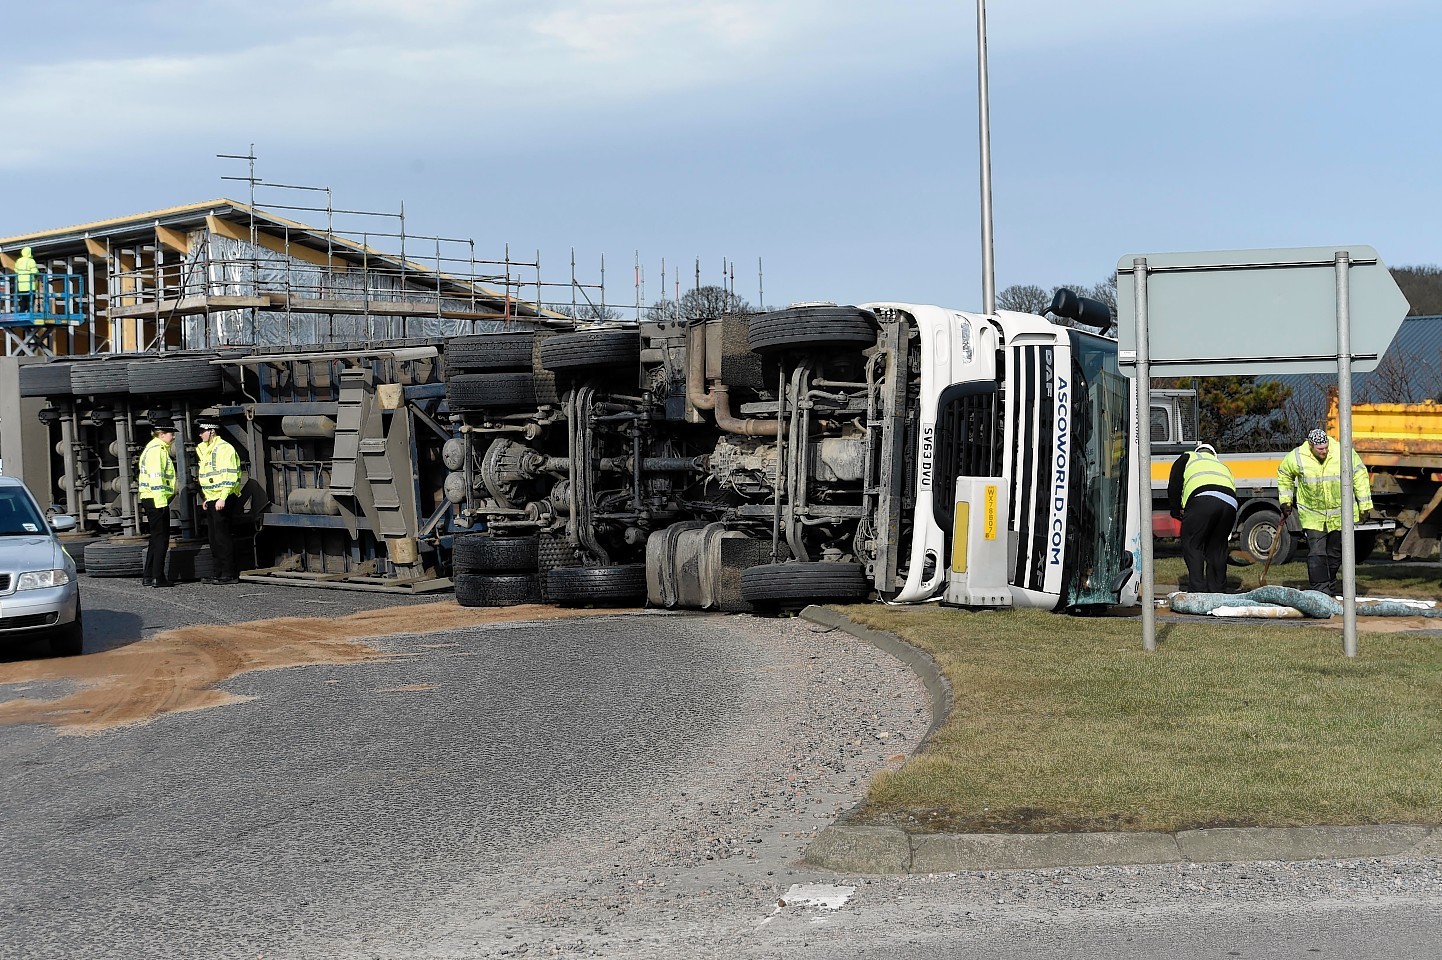 The lorry was not carrying a load when it overturned.